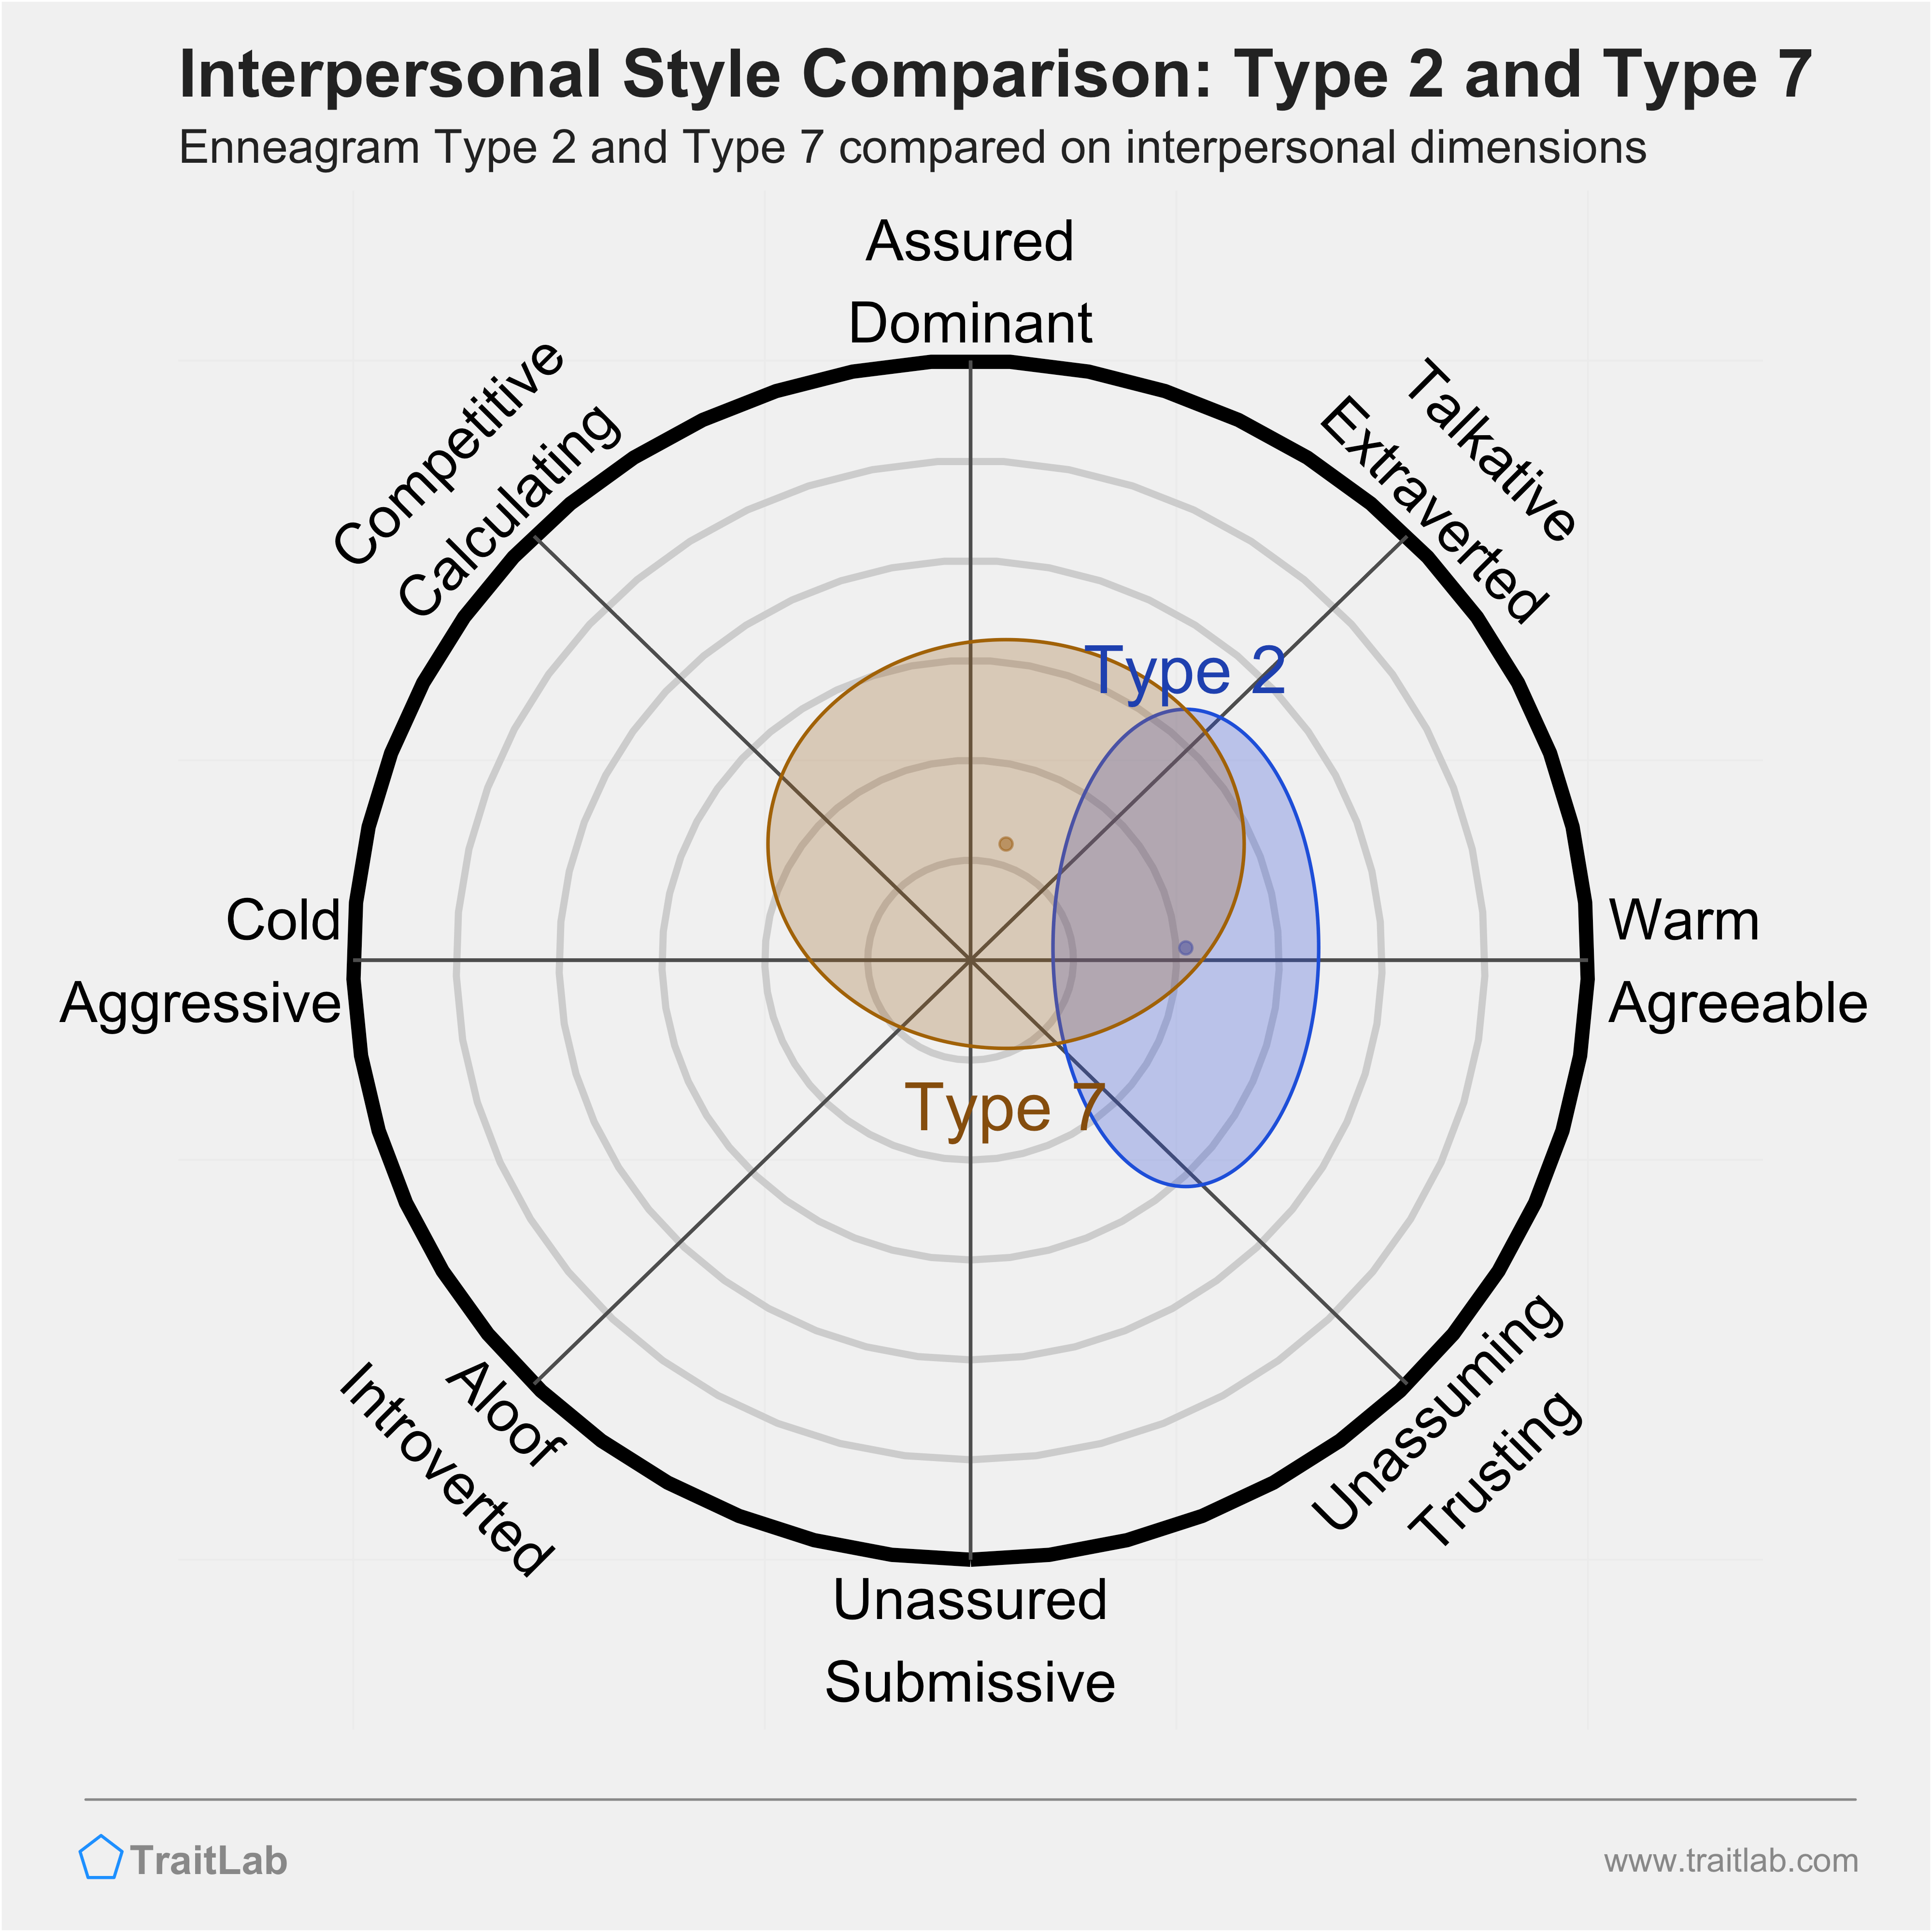 Enneagram Type 2 and Type 7 comparison across interpersonal dimensions